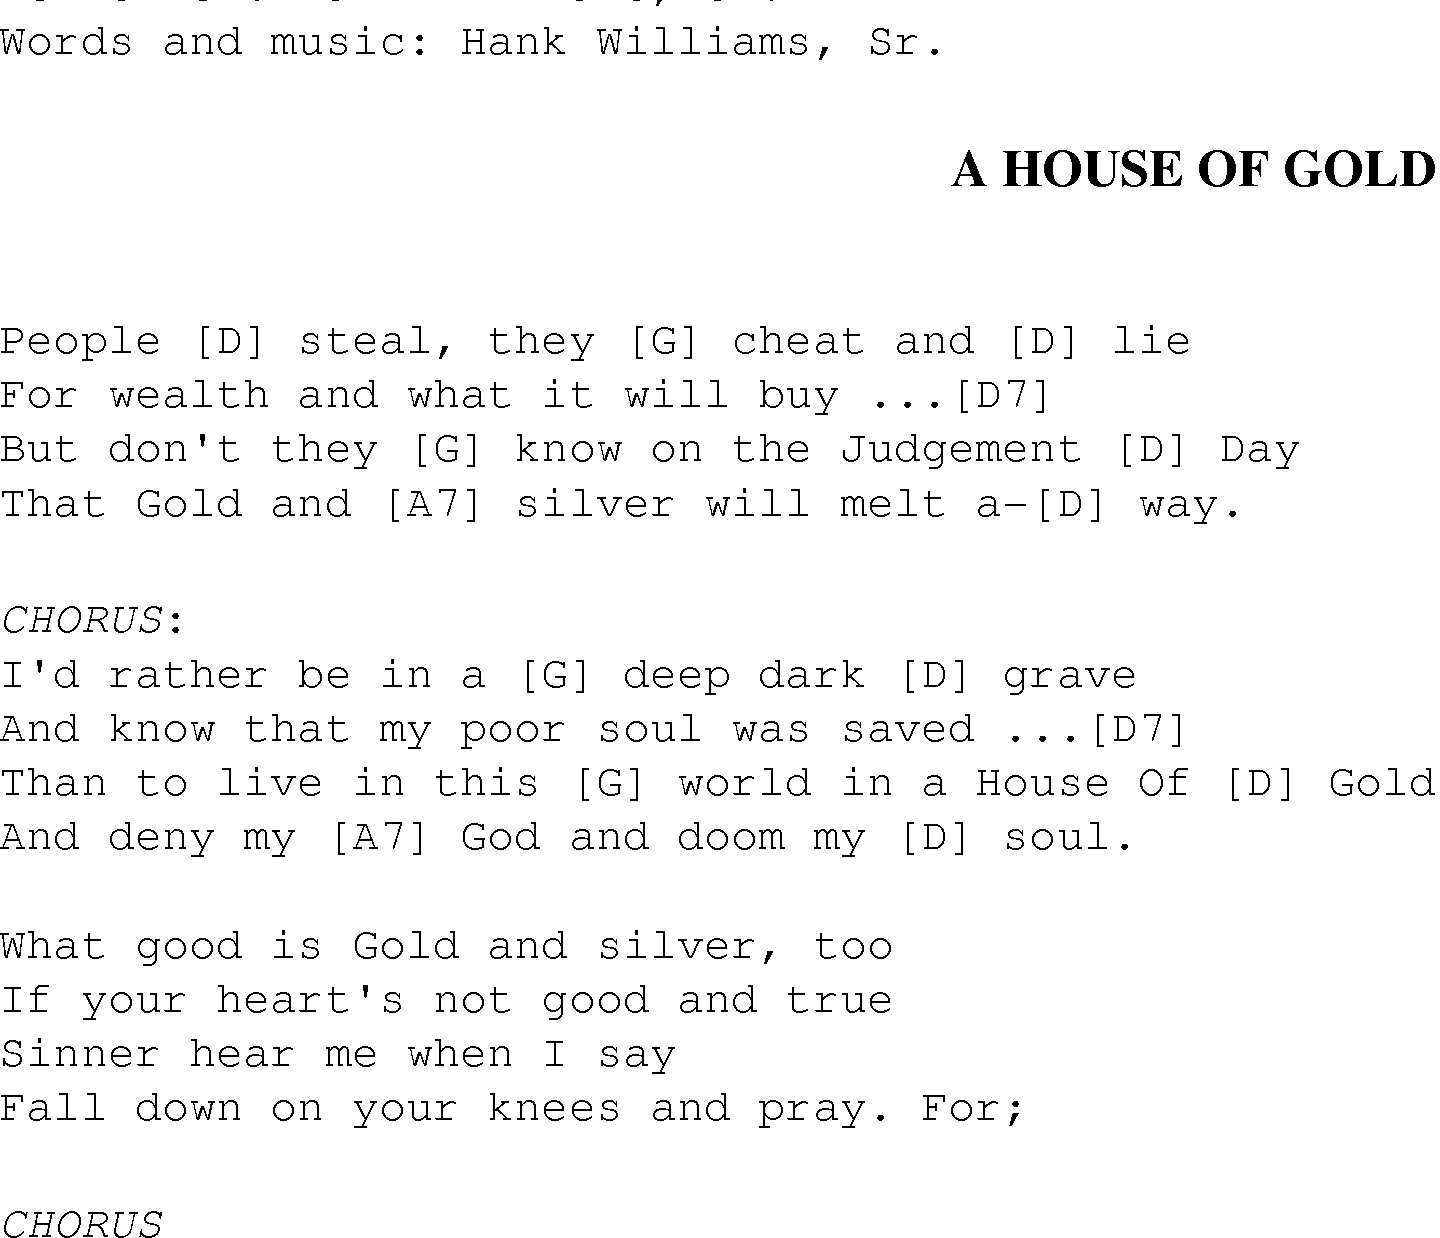 Gospel Song: a_house_of_gold, lyrics and chords.